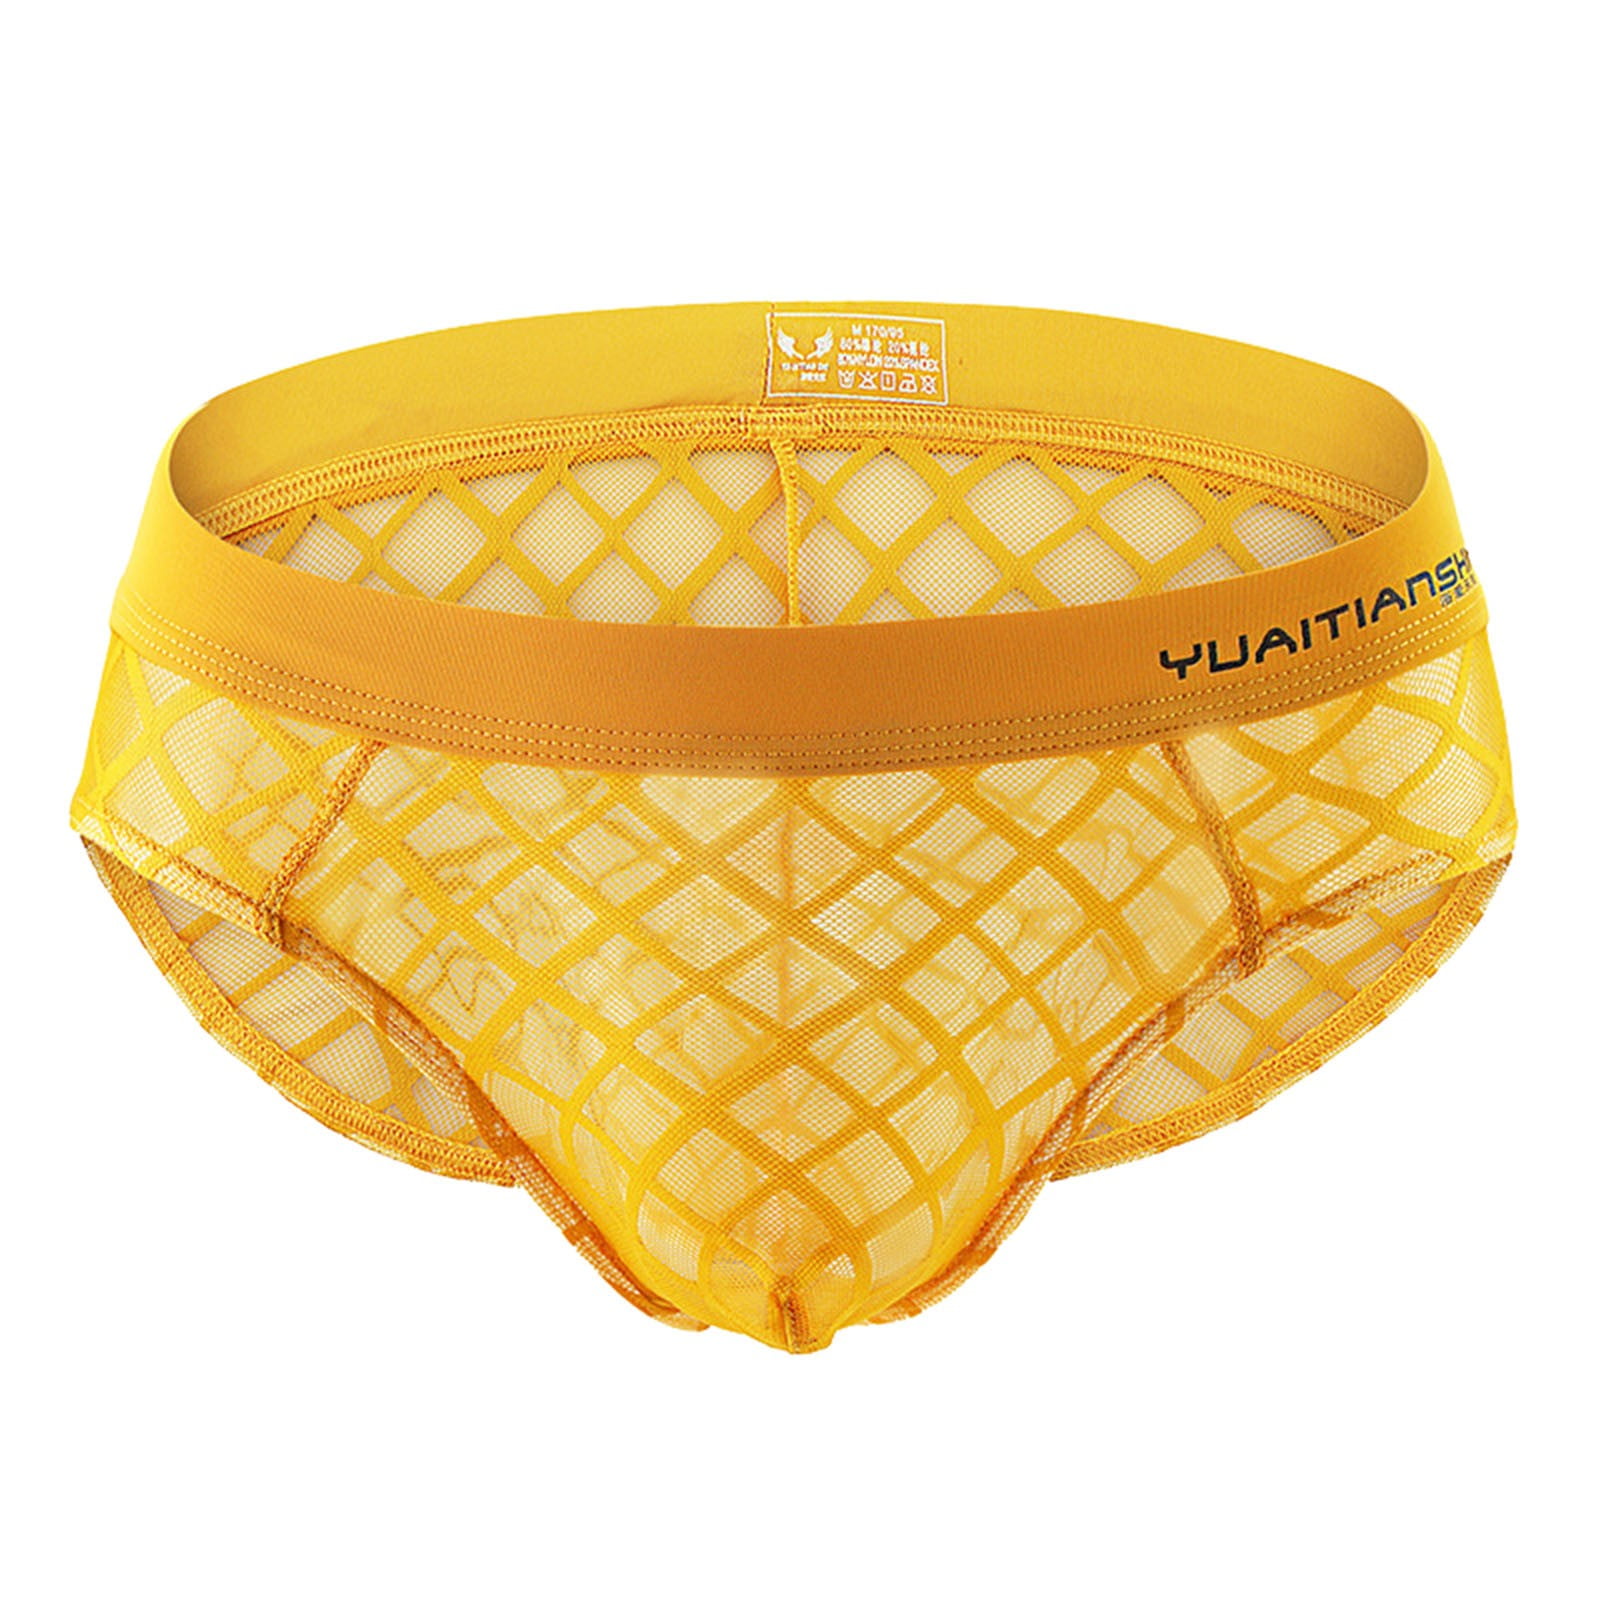 Boxers Briefs for Men Briefs Classic Underwear Solid Yellow S 1-Pack ...